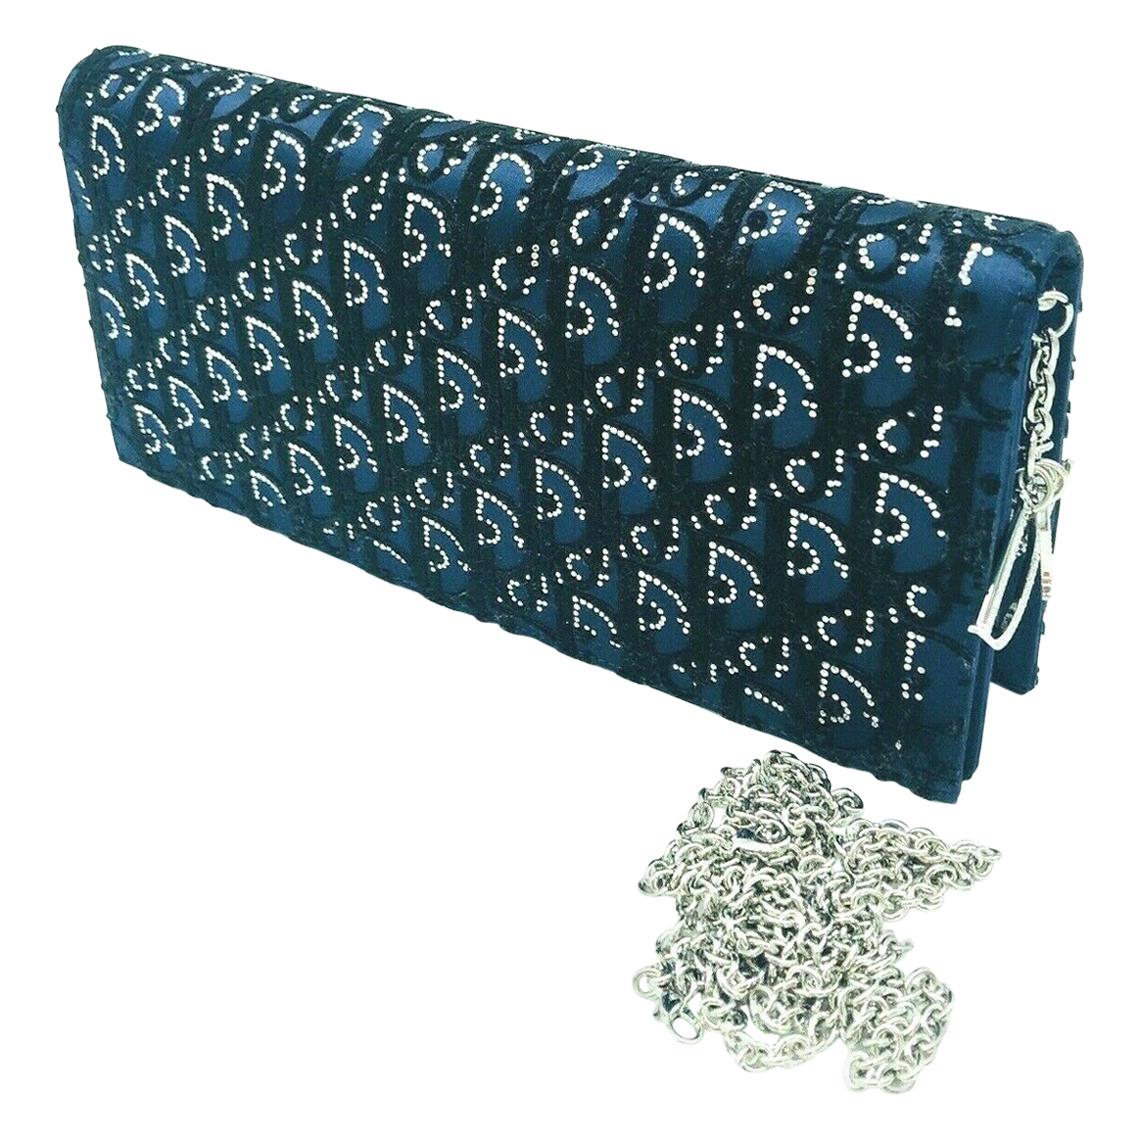 DIOR - Lady Dior Evening Chain Clutch Bag - Navy with Crystals-New Condition For Sale